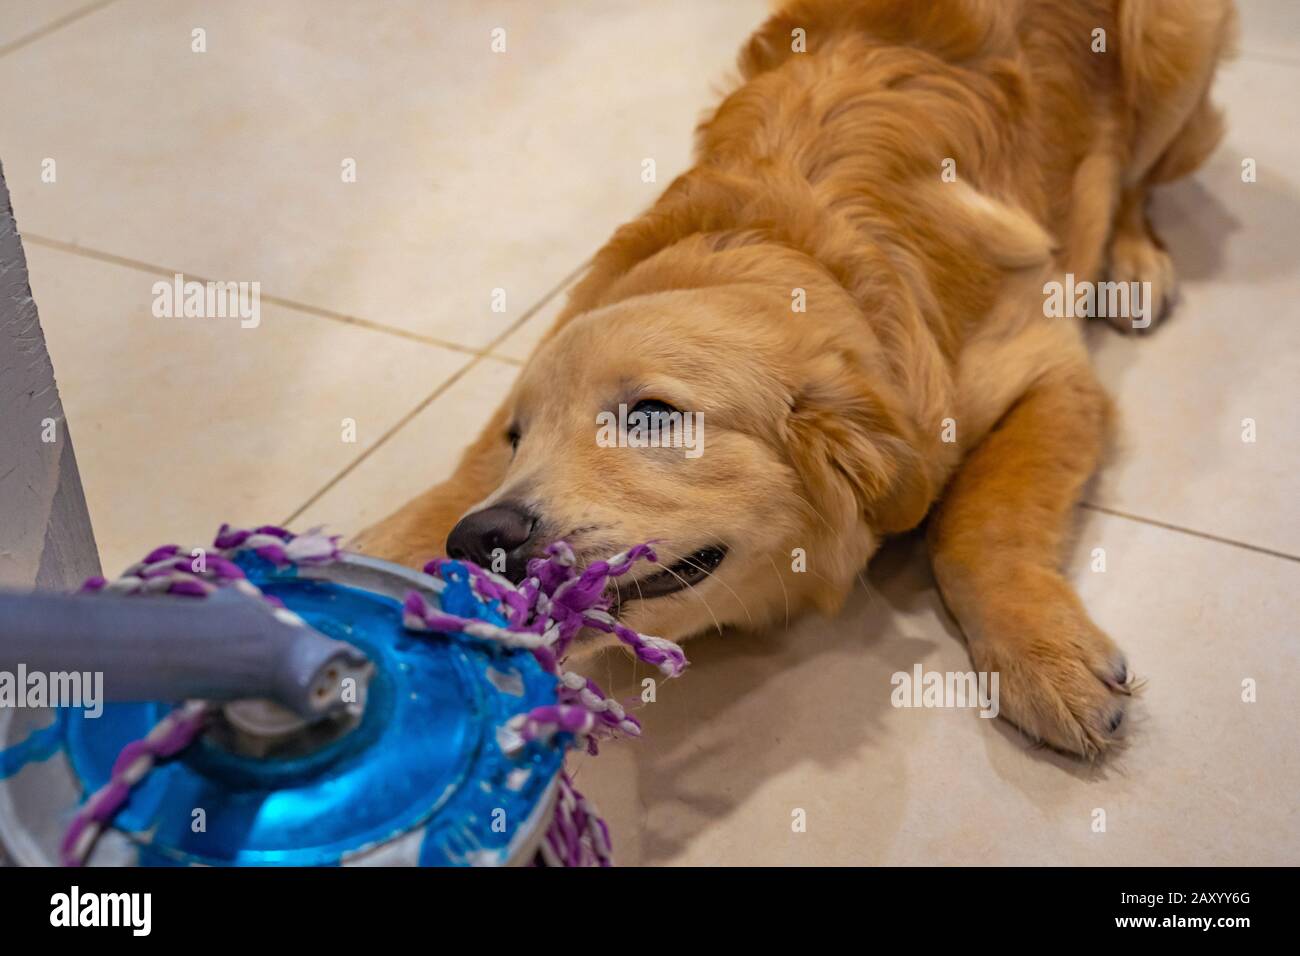 Mischief golden dog playing and biting the wet mop Stock Photo